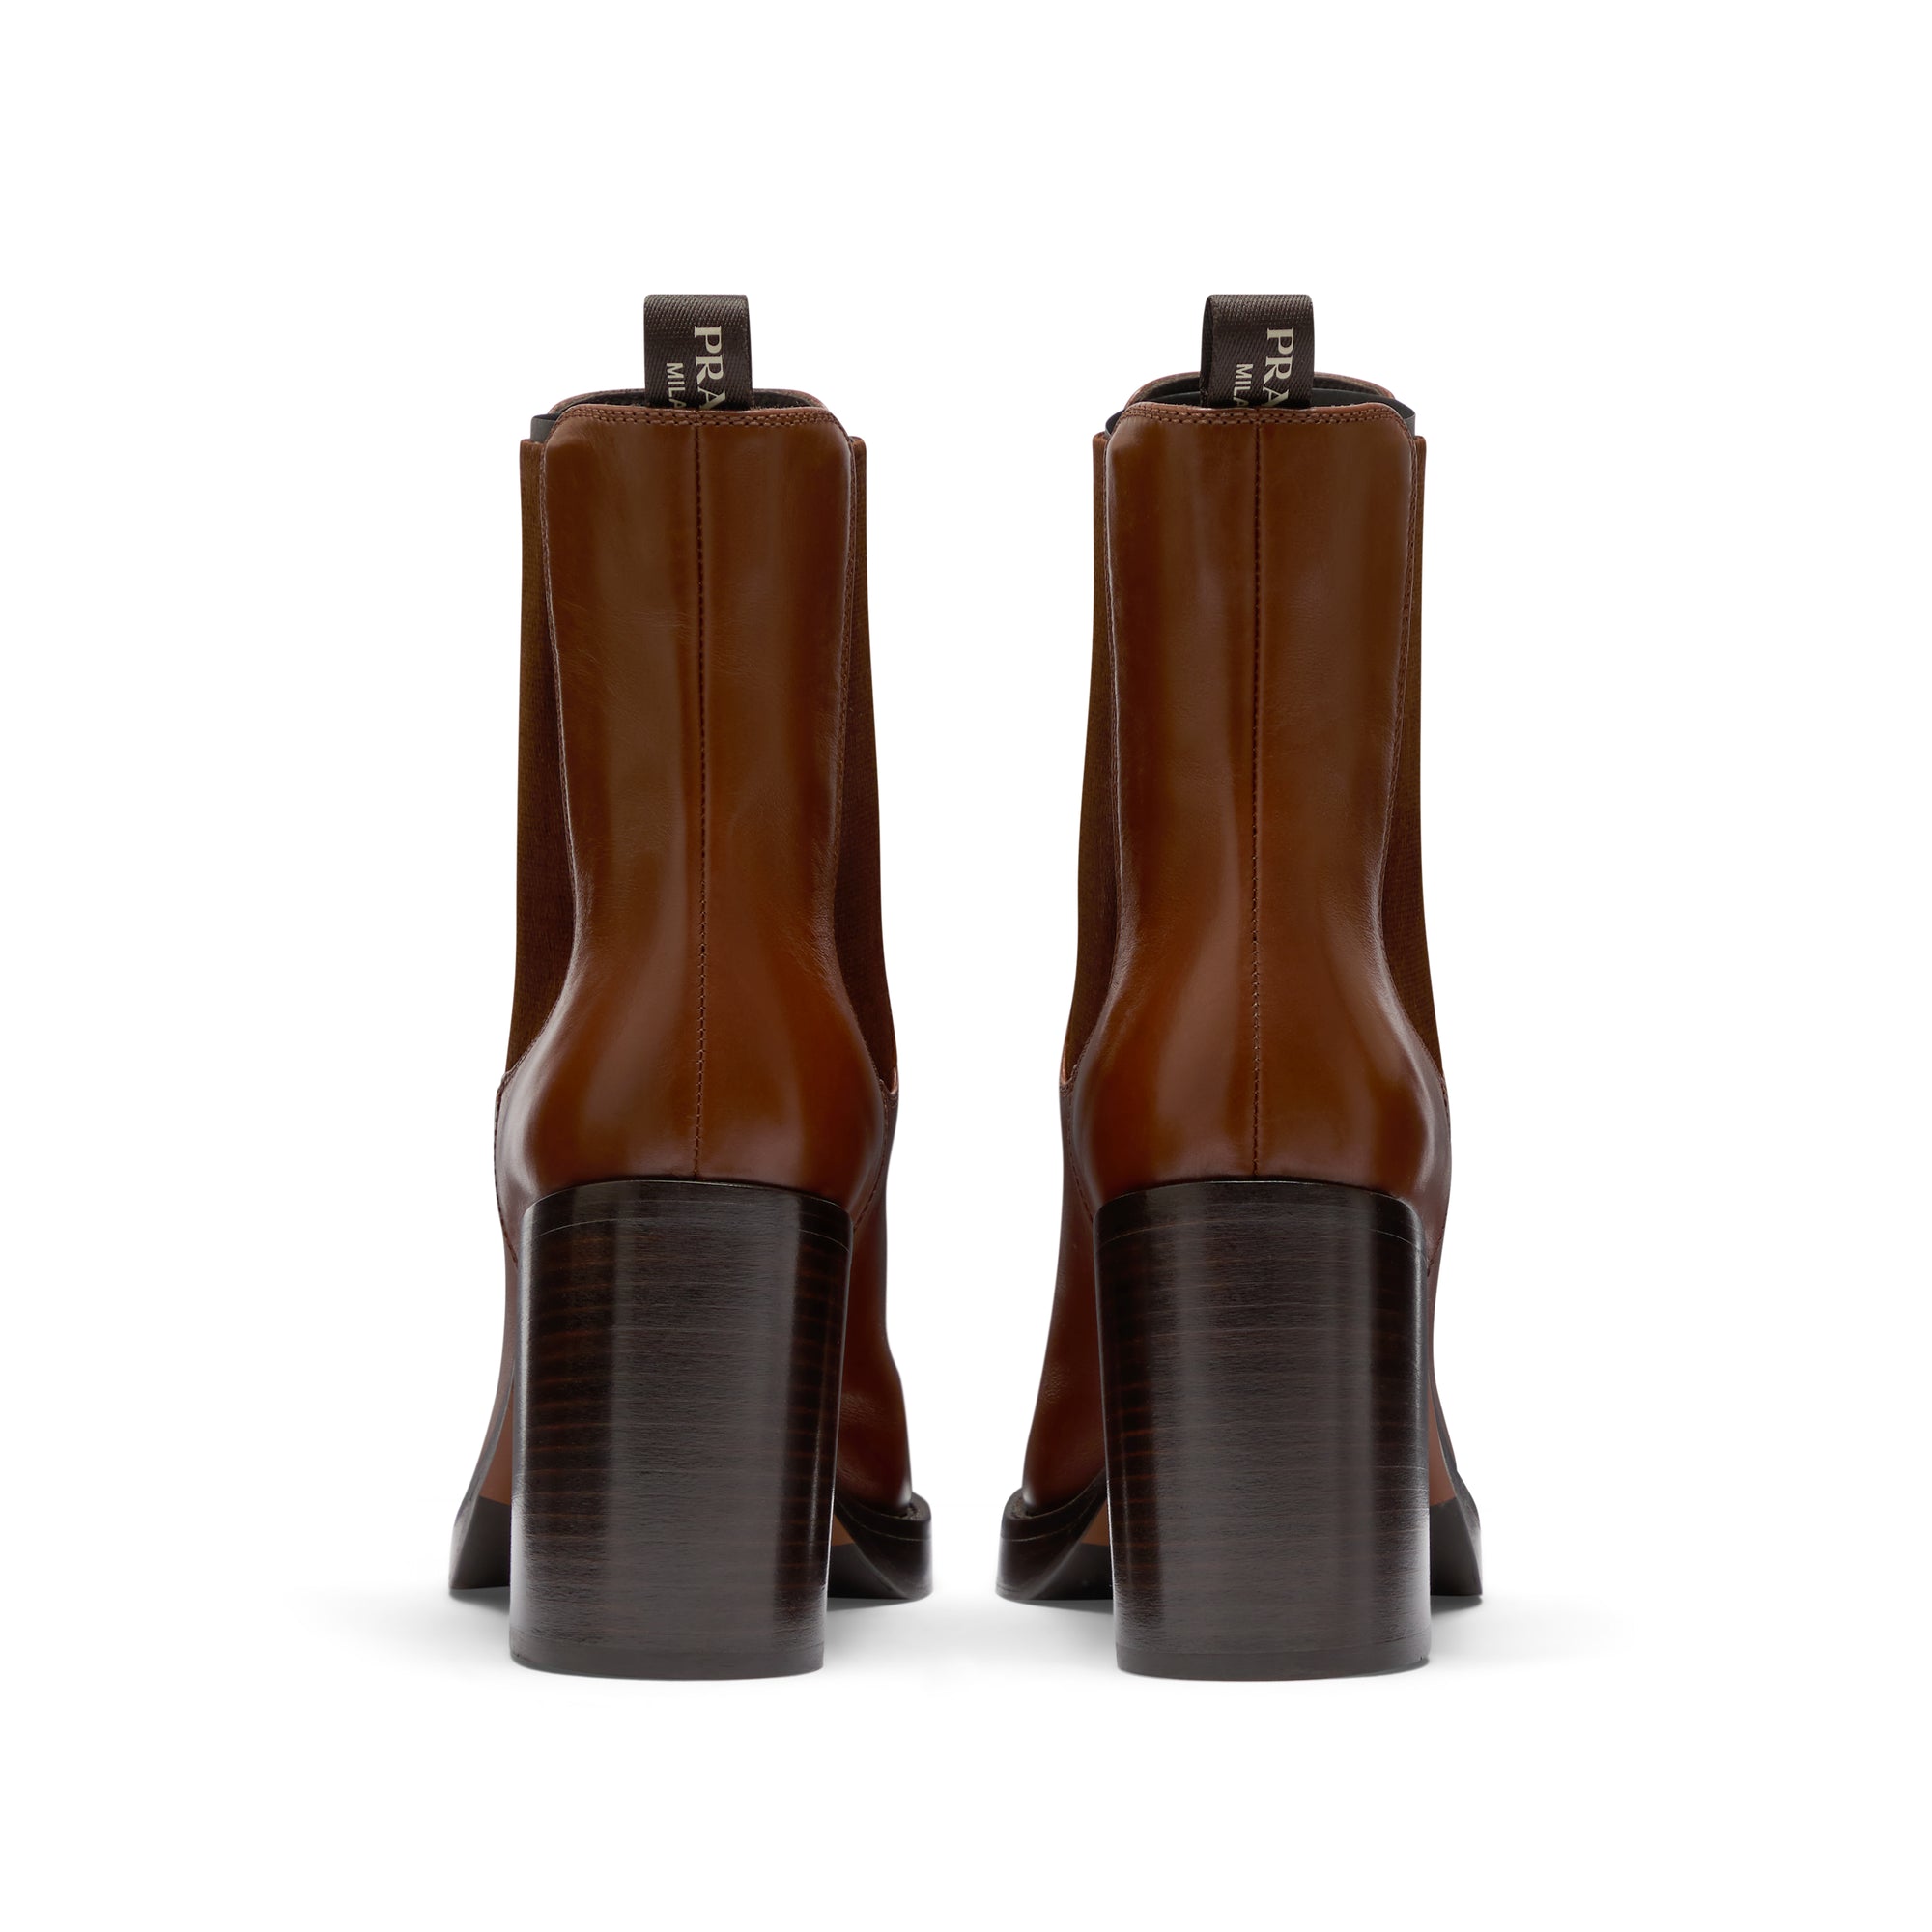 Prada - Women’s Leather Ankle Boots - (Cognac) view 4